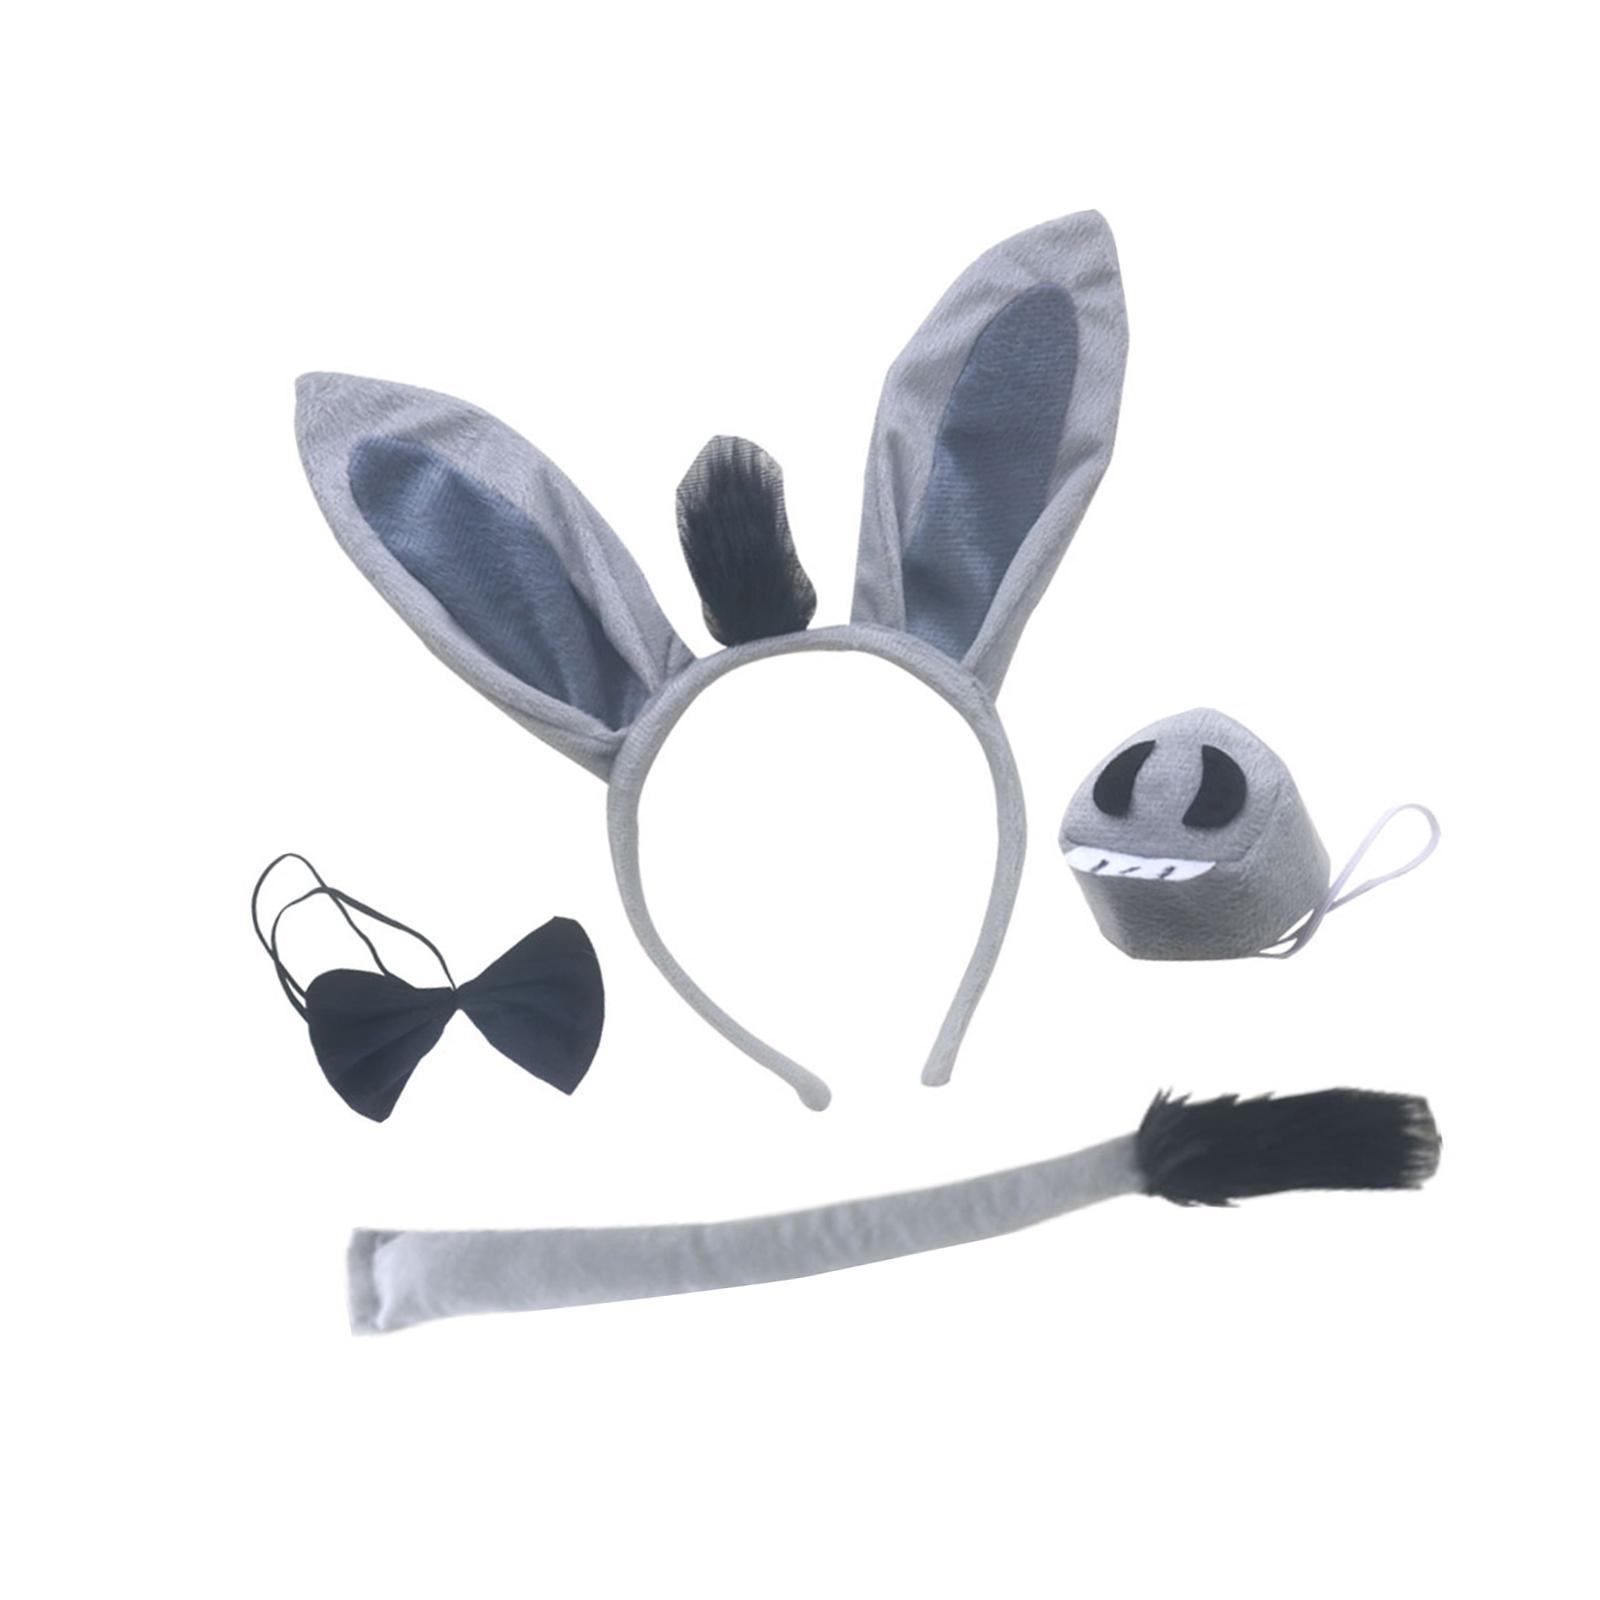 Kids Fancy Dress Up Bunny Costumes Props for Performance Theater Stage